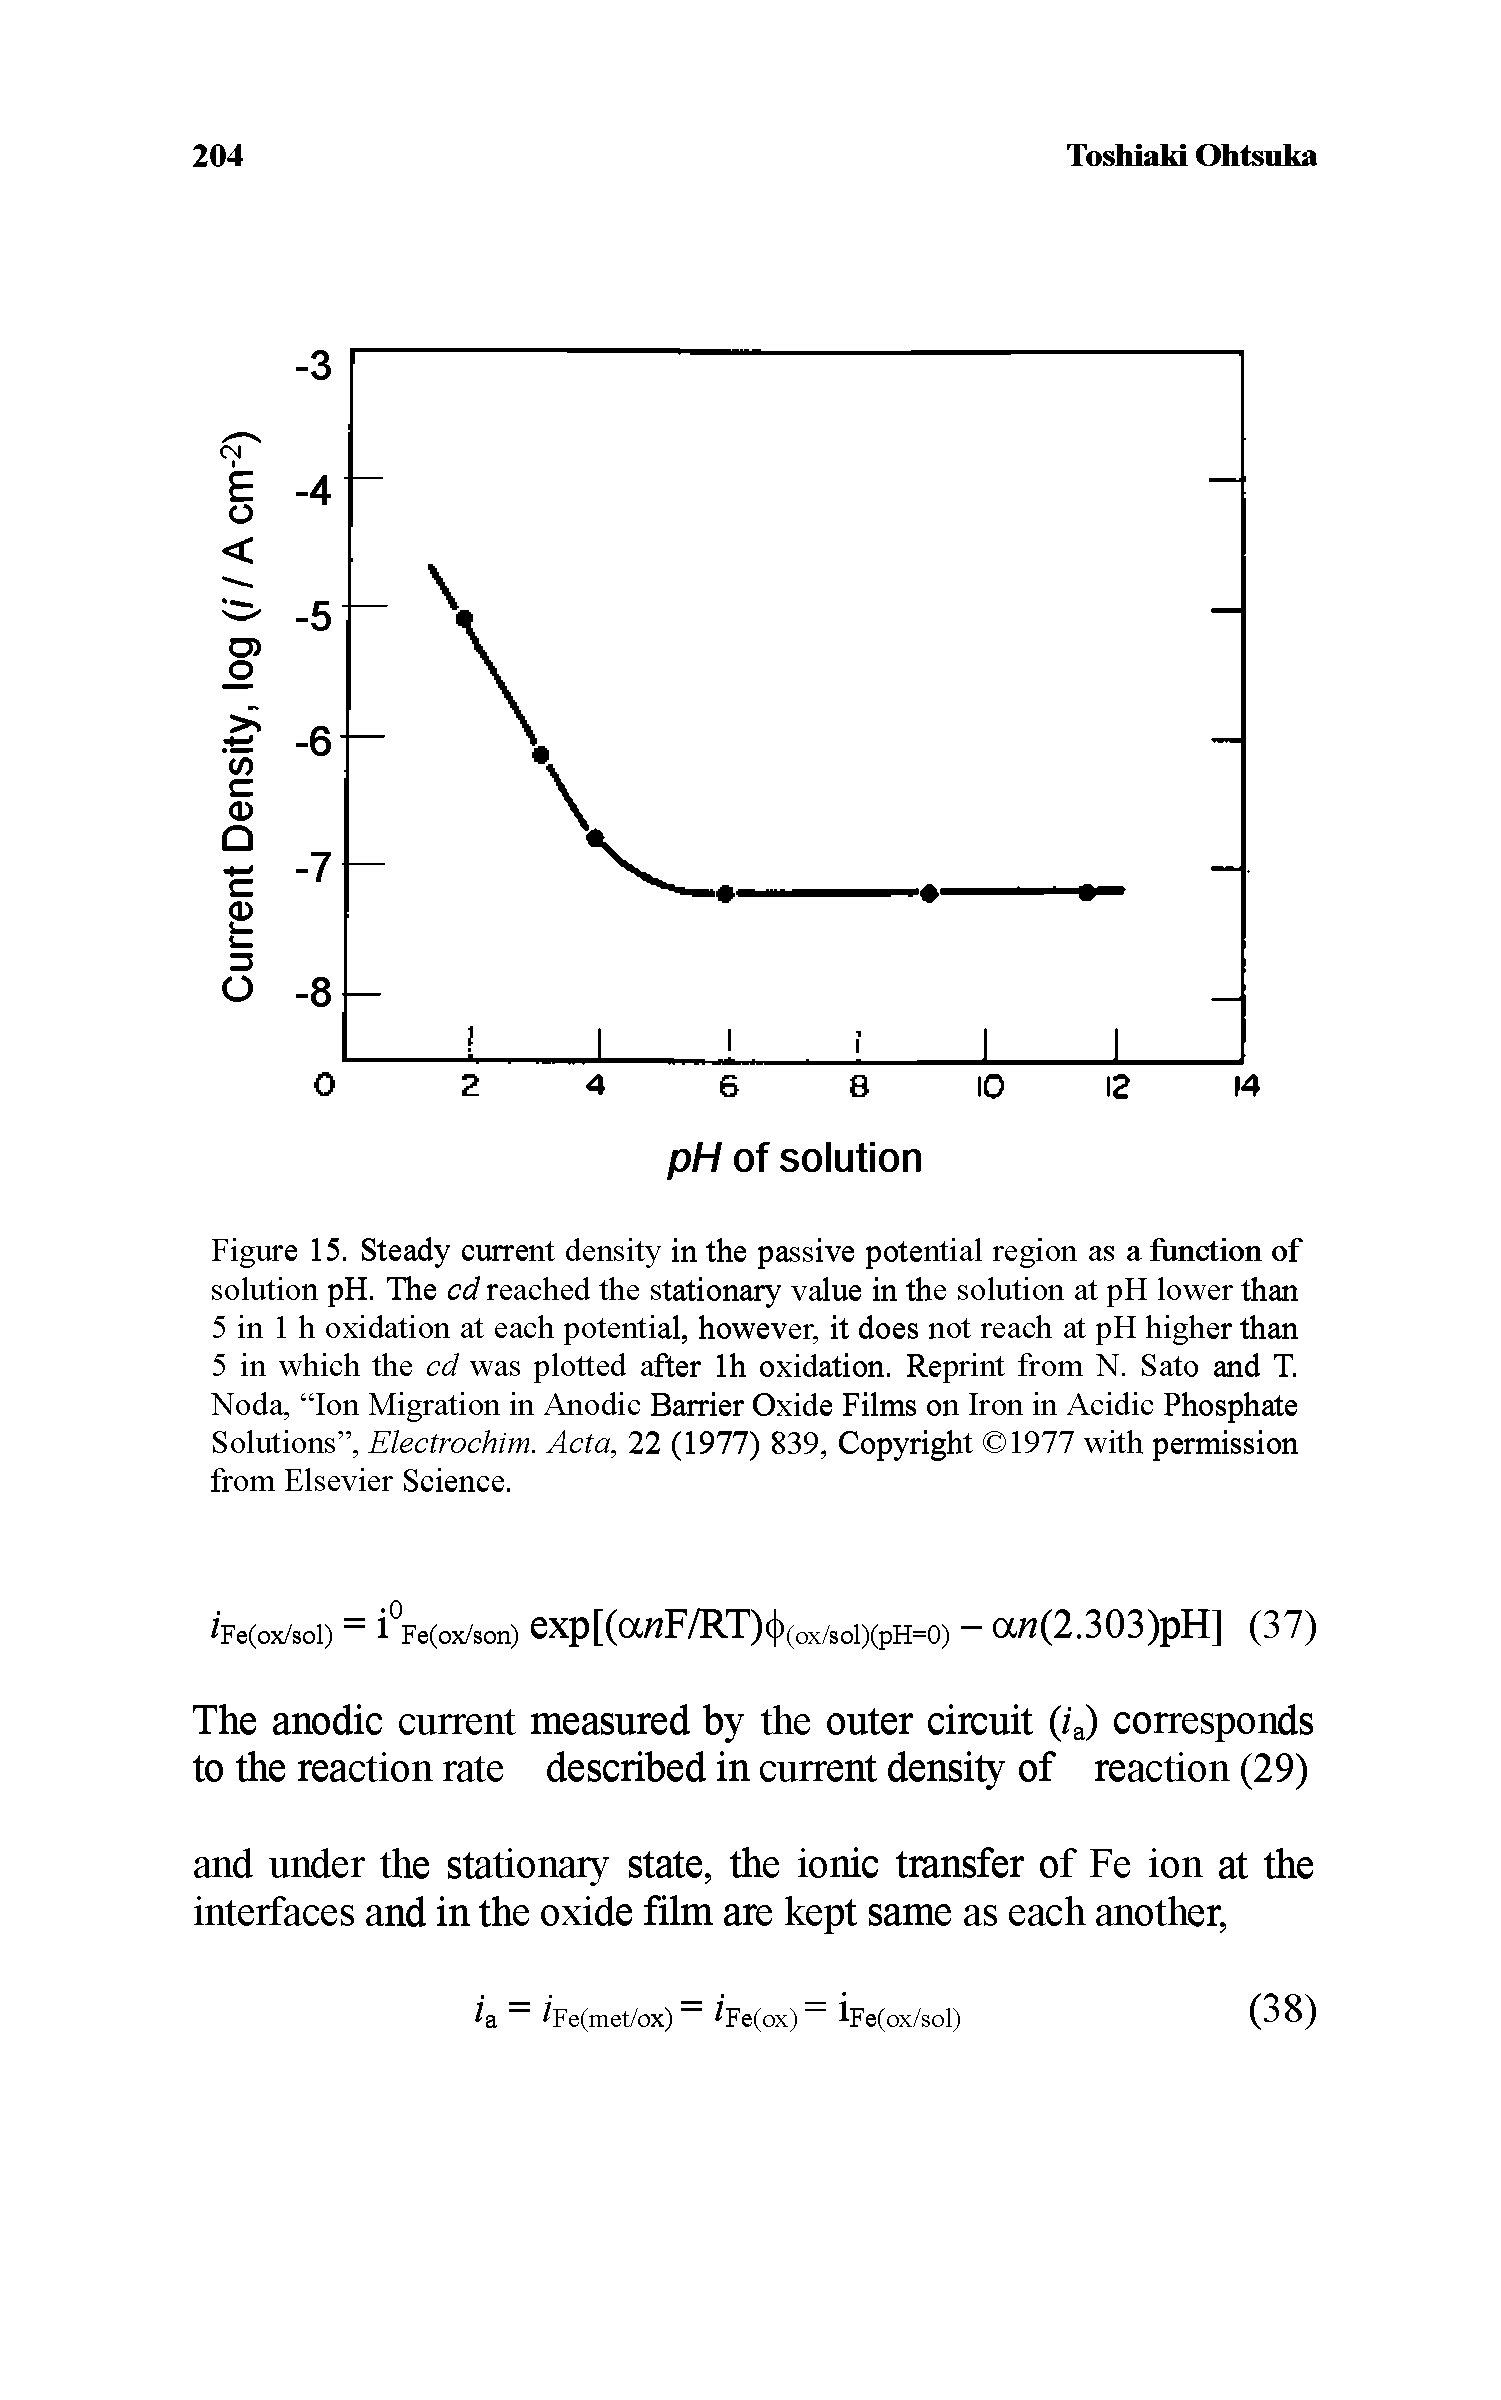 Figure 15. Steady current density in the passive potential region as a function of solution pH. The cd reached the stationary value in the solution at pH lower than 5 in 1 h oxidation at each potential, however, it does not reach at pH higher than 5 in which the cd was plotted after Ih oxidation. Reprint from N. Sato and T. Noda, Ion Migration in Anodic Barrier Oxide Films on Iron in Acidic Phosphate Solutions , Electrochim. Acta, 22 (1977) 839, Copyright 1977 with permission from Elsevier Science.